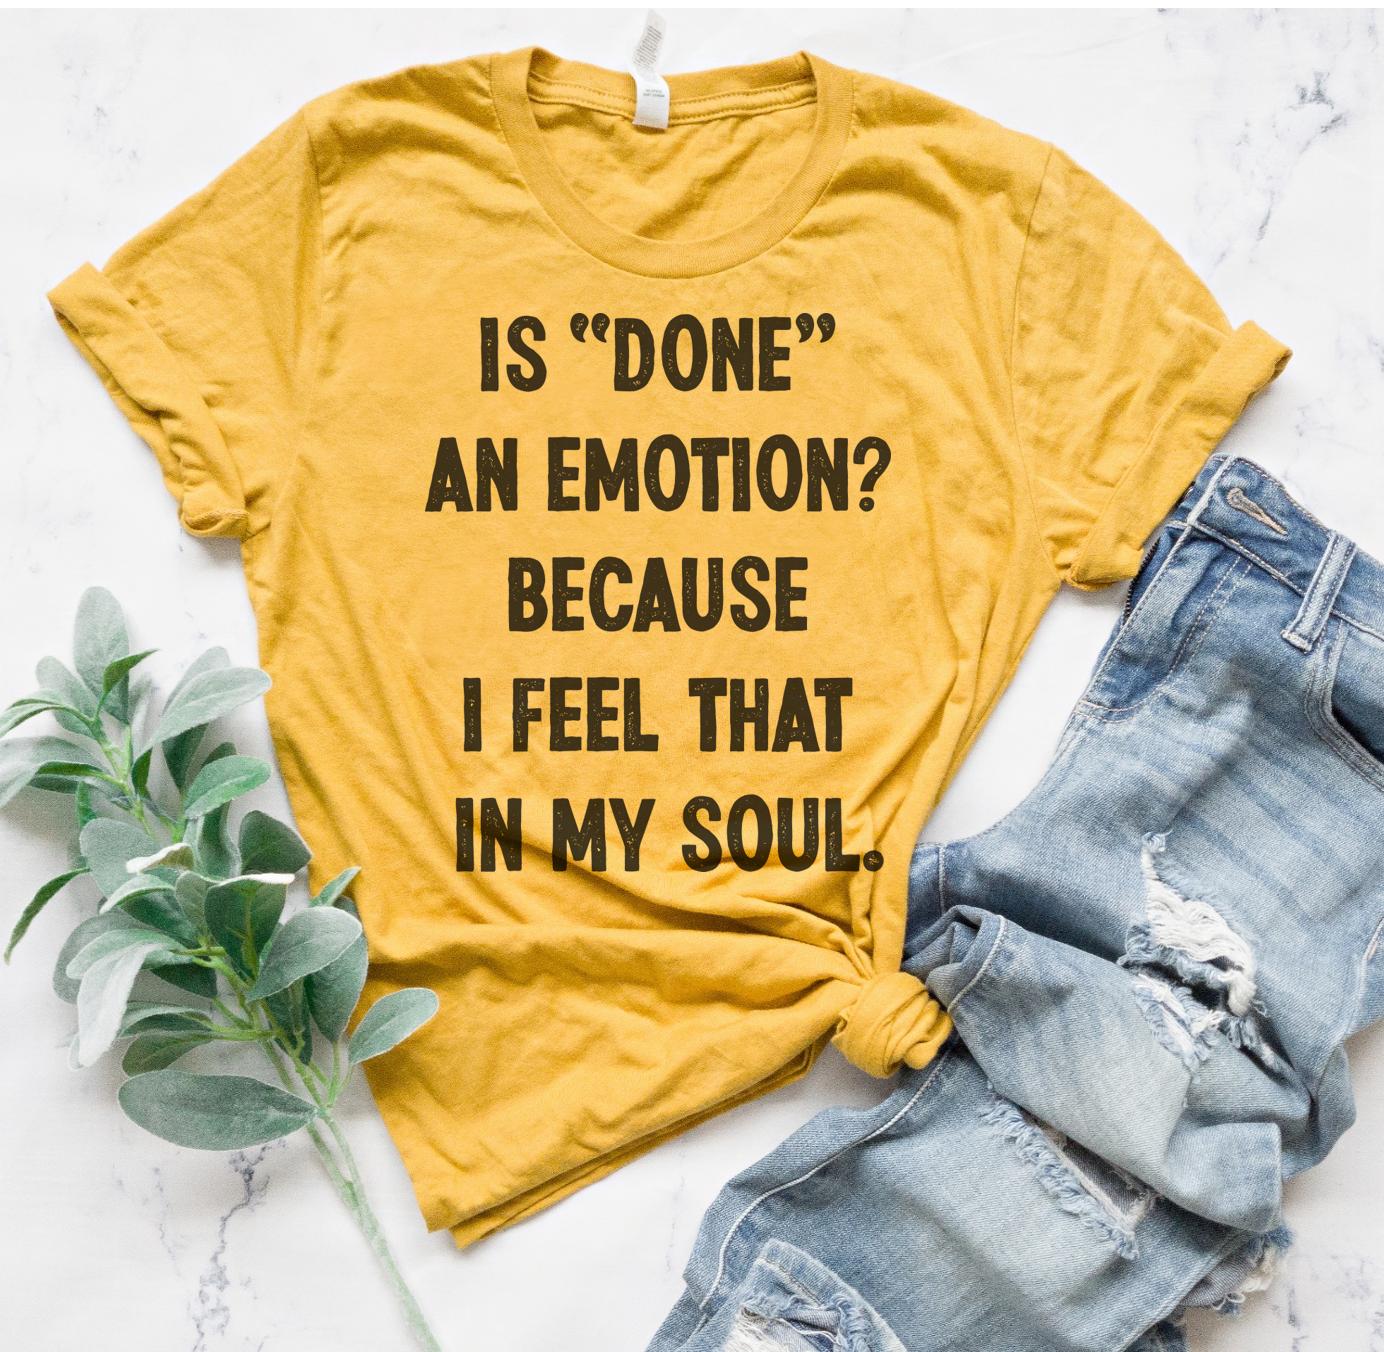 Is Done an Emotion Shirt sarcastic t-shirt funny tee tired mom shirt funny tee sarcasm co-worker mom for Daughter casual top comfy soft exhausted mom shirt casual t-shirt  gift for stepdaughter tee Sublimation Gift Shirt T-shirt Party ON Designs